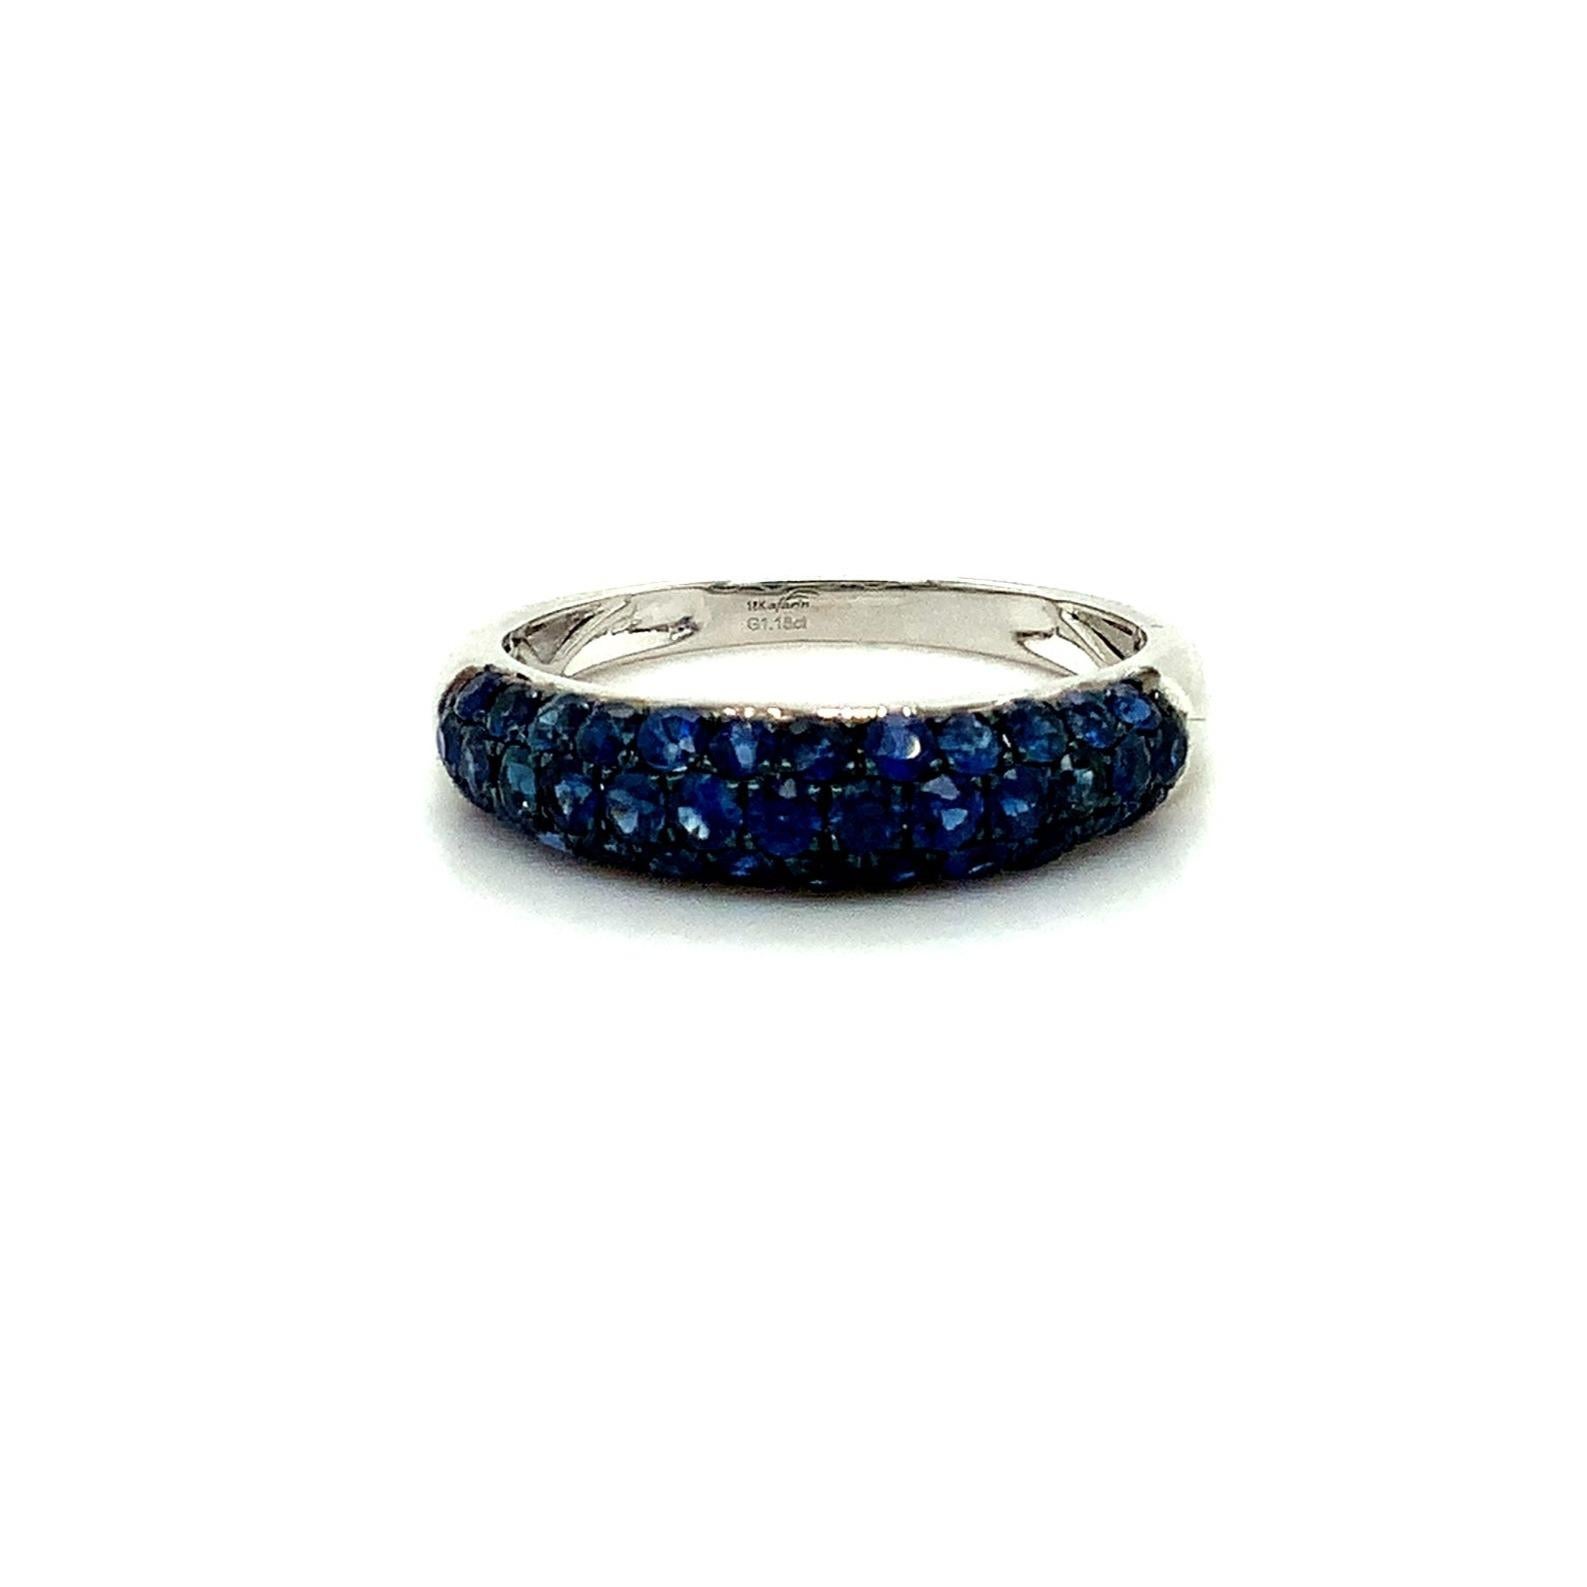 Afarin Collection 3 Rows of Pavé Blue Sapphire band set in 18K White Gold finished with Black Rhodium.  These vibrant brilliant cut Sapphires are on fire.
37 Round Brilliant Cut Natural Blue Sapphire  =1.18 cts 
The Diameter is 4.48 x